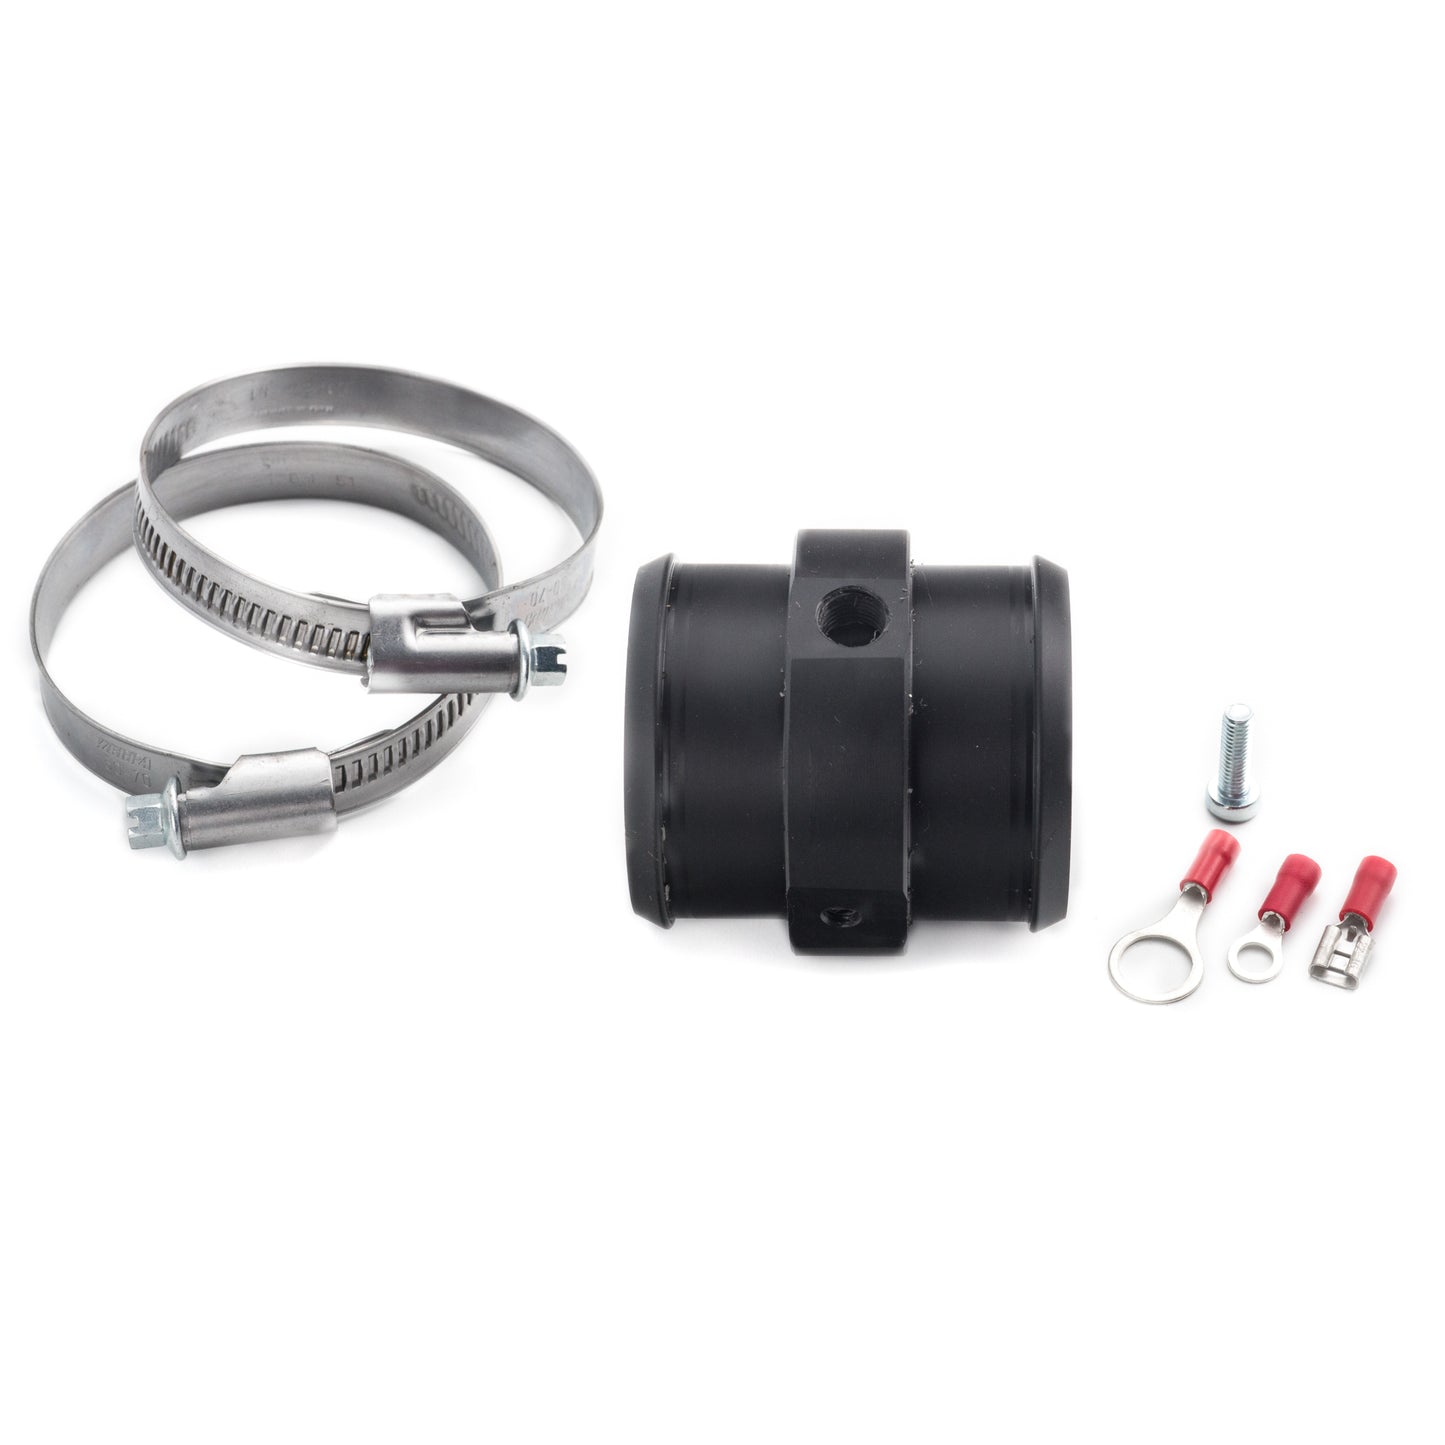 50mm (2") Coolant Hose Adapter for Coolant Temperature and Level Measurements